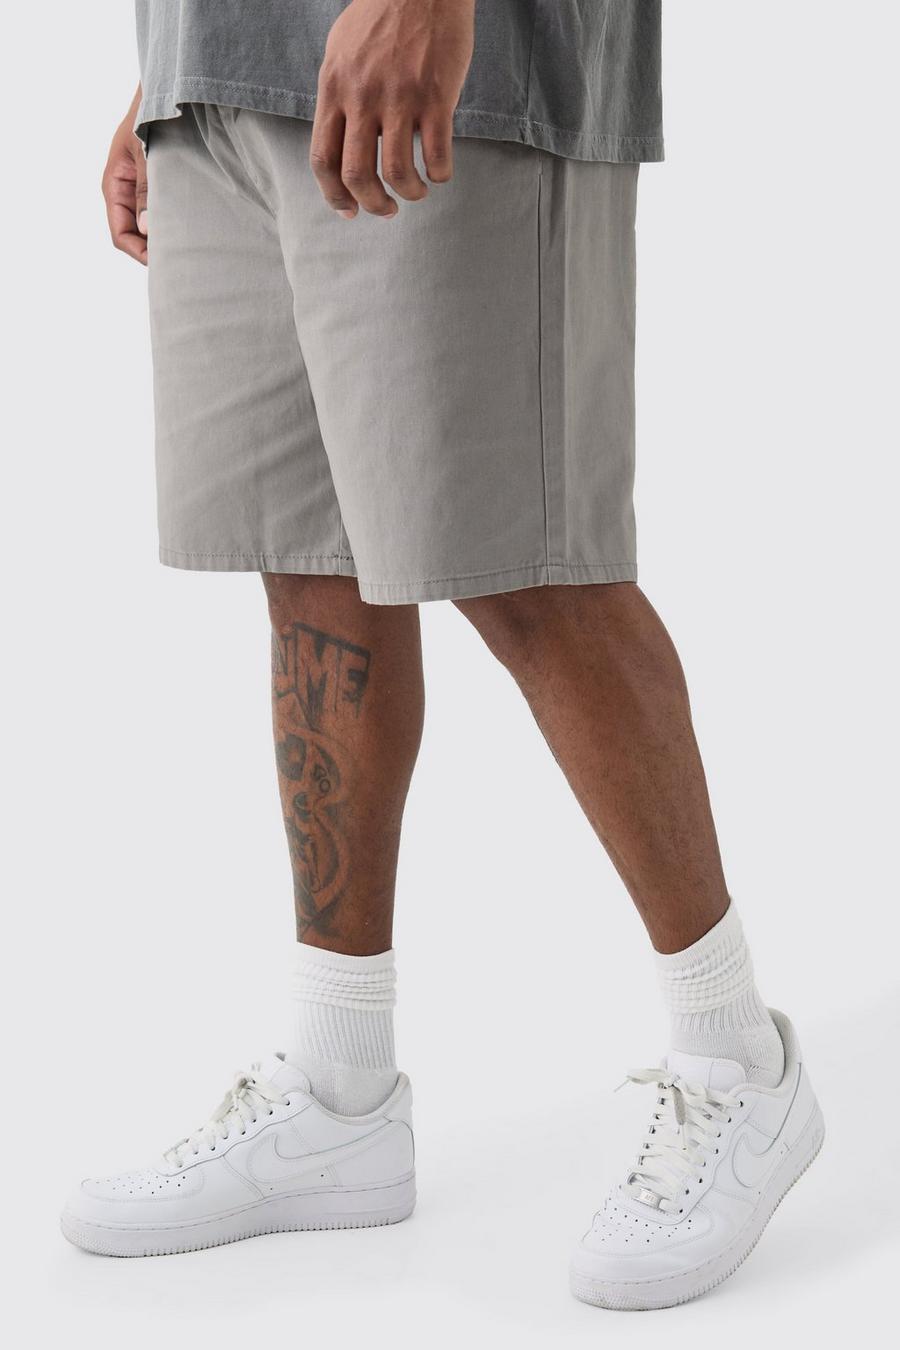 Plus Elasticated Waist Grey Relaxed Fit Shorts